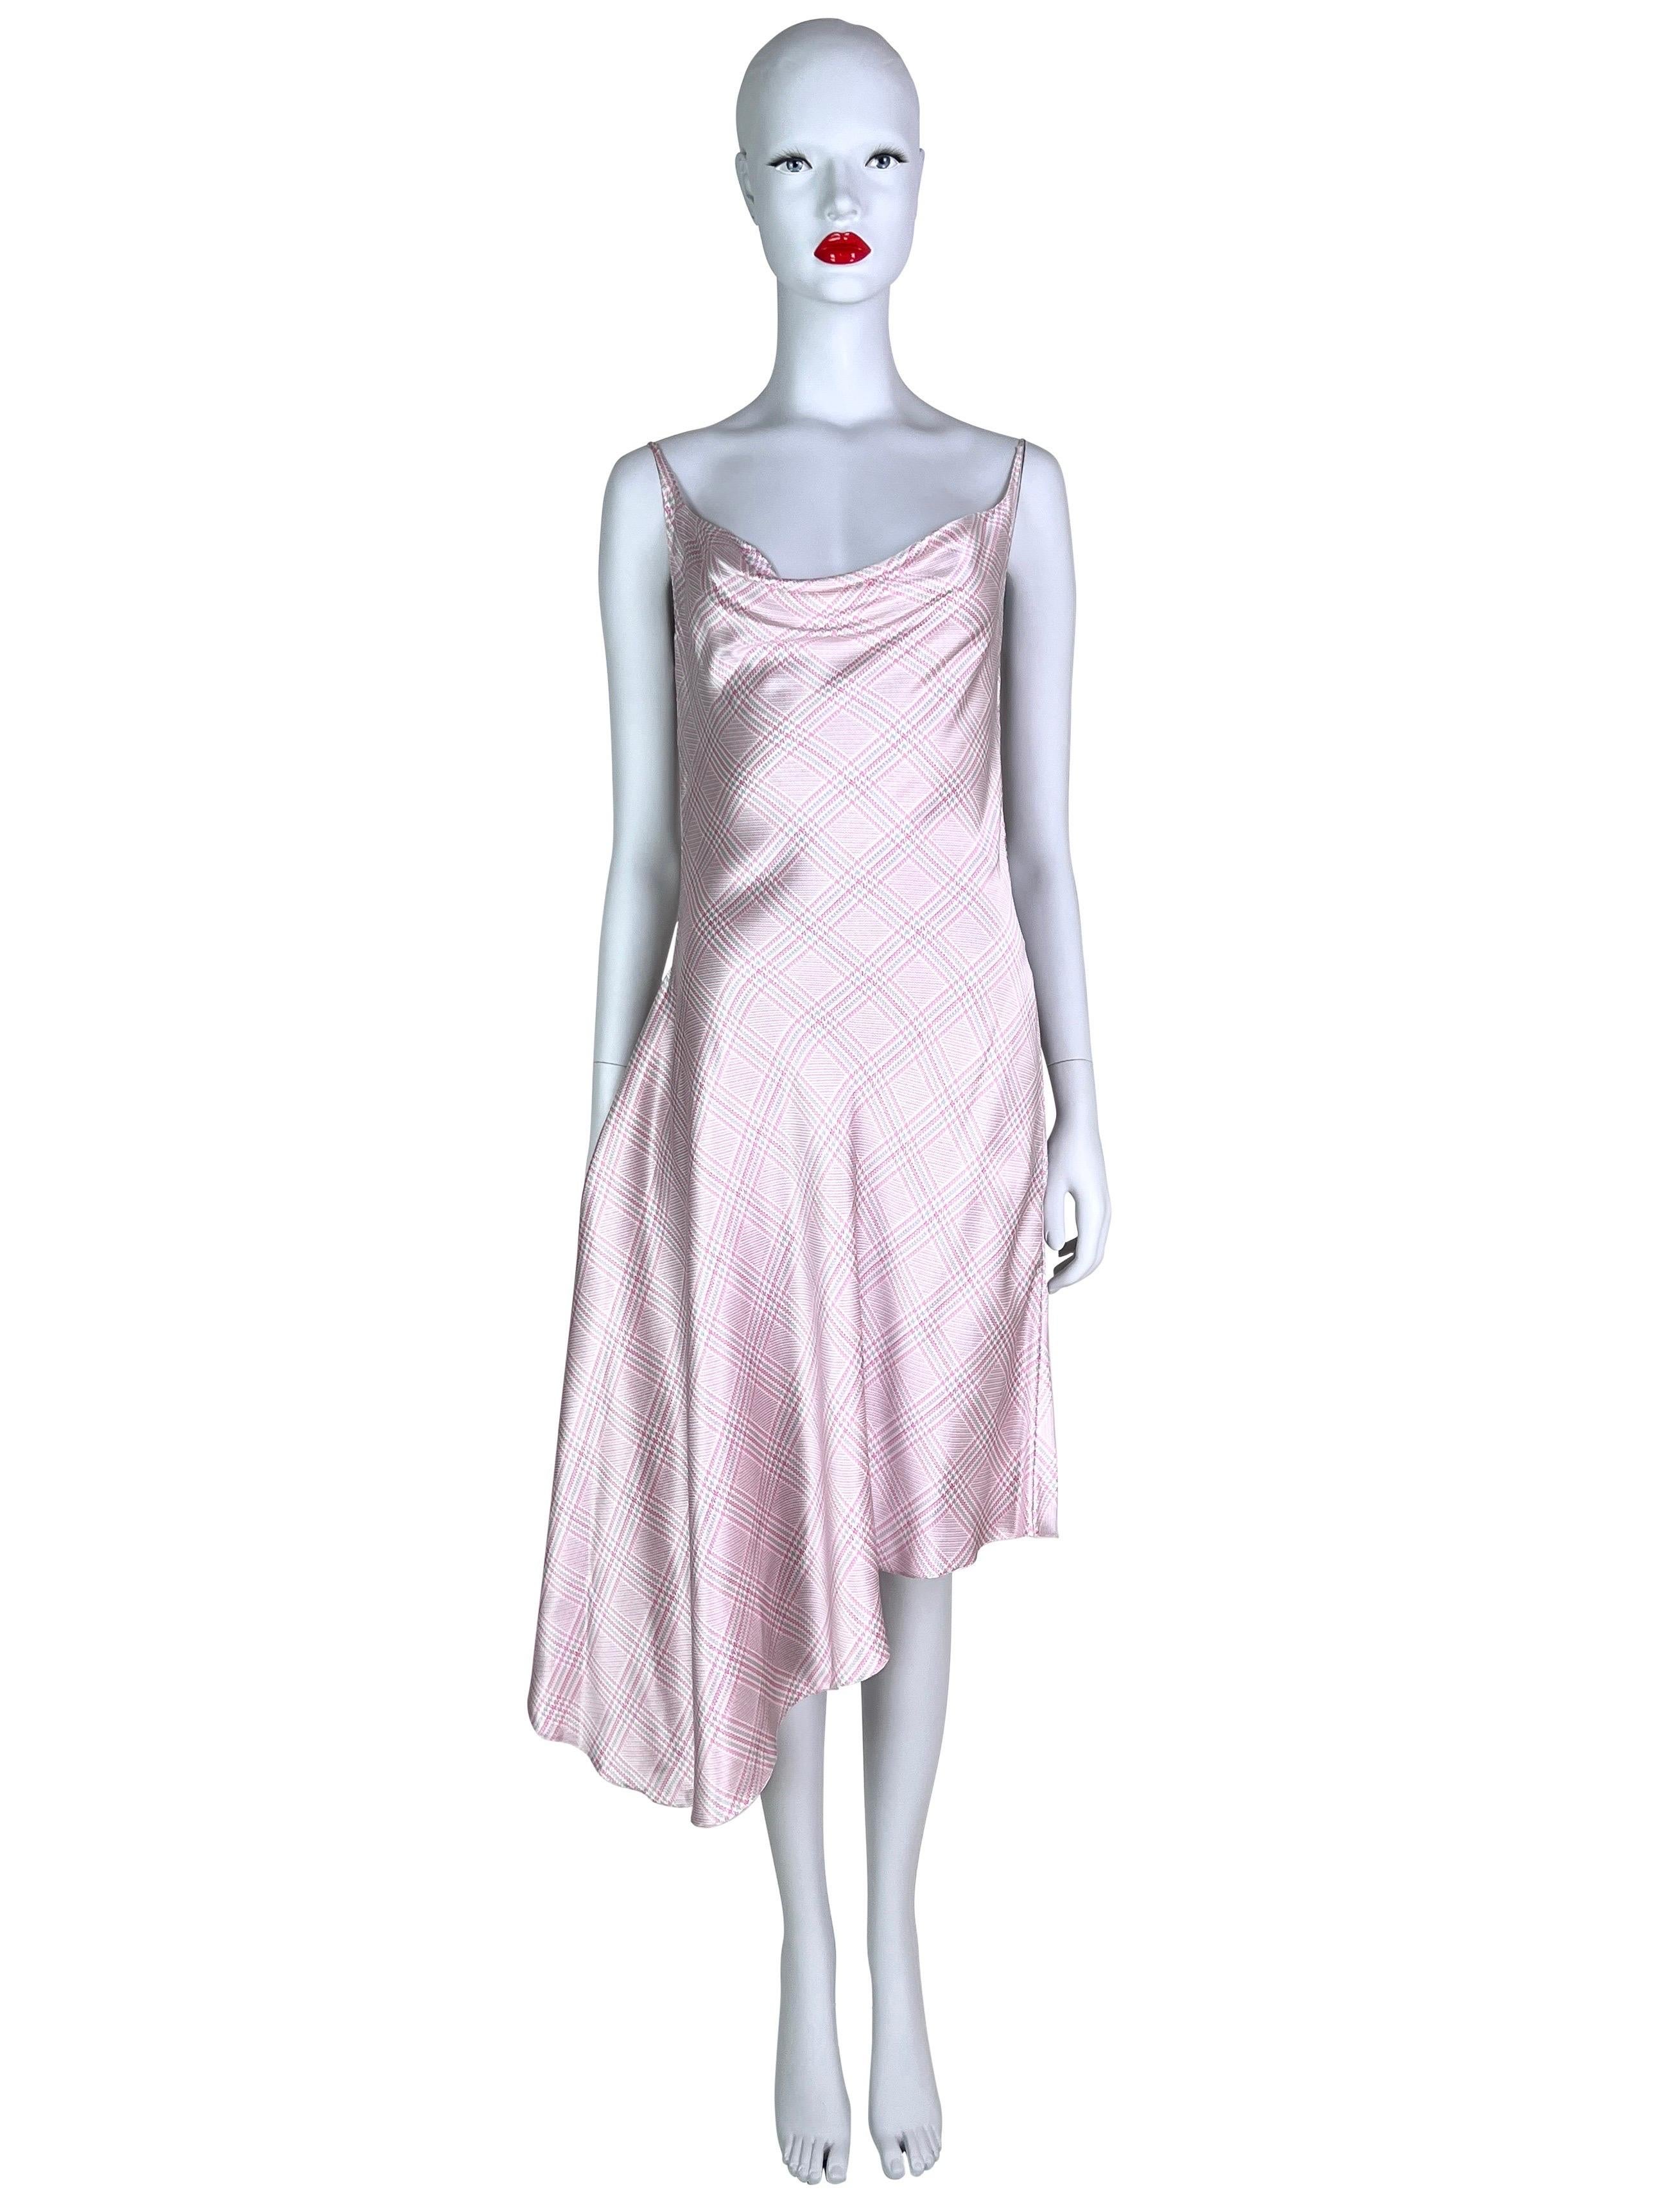 A gorgeous silk bias-cut dress from Alexander McQueen for Givenchy.

So FR 40, recommended for sizes US 0 through 6 or UK 4 through 10. Please be advised that this is a bias-cut, draped dress, so the measurements aren’t reflective of a fitting,